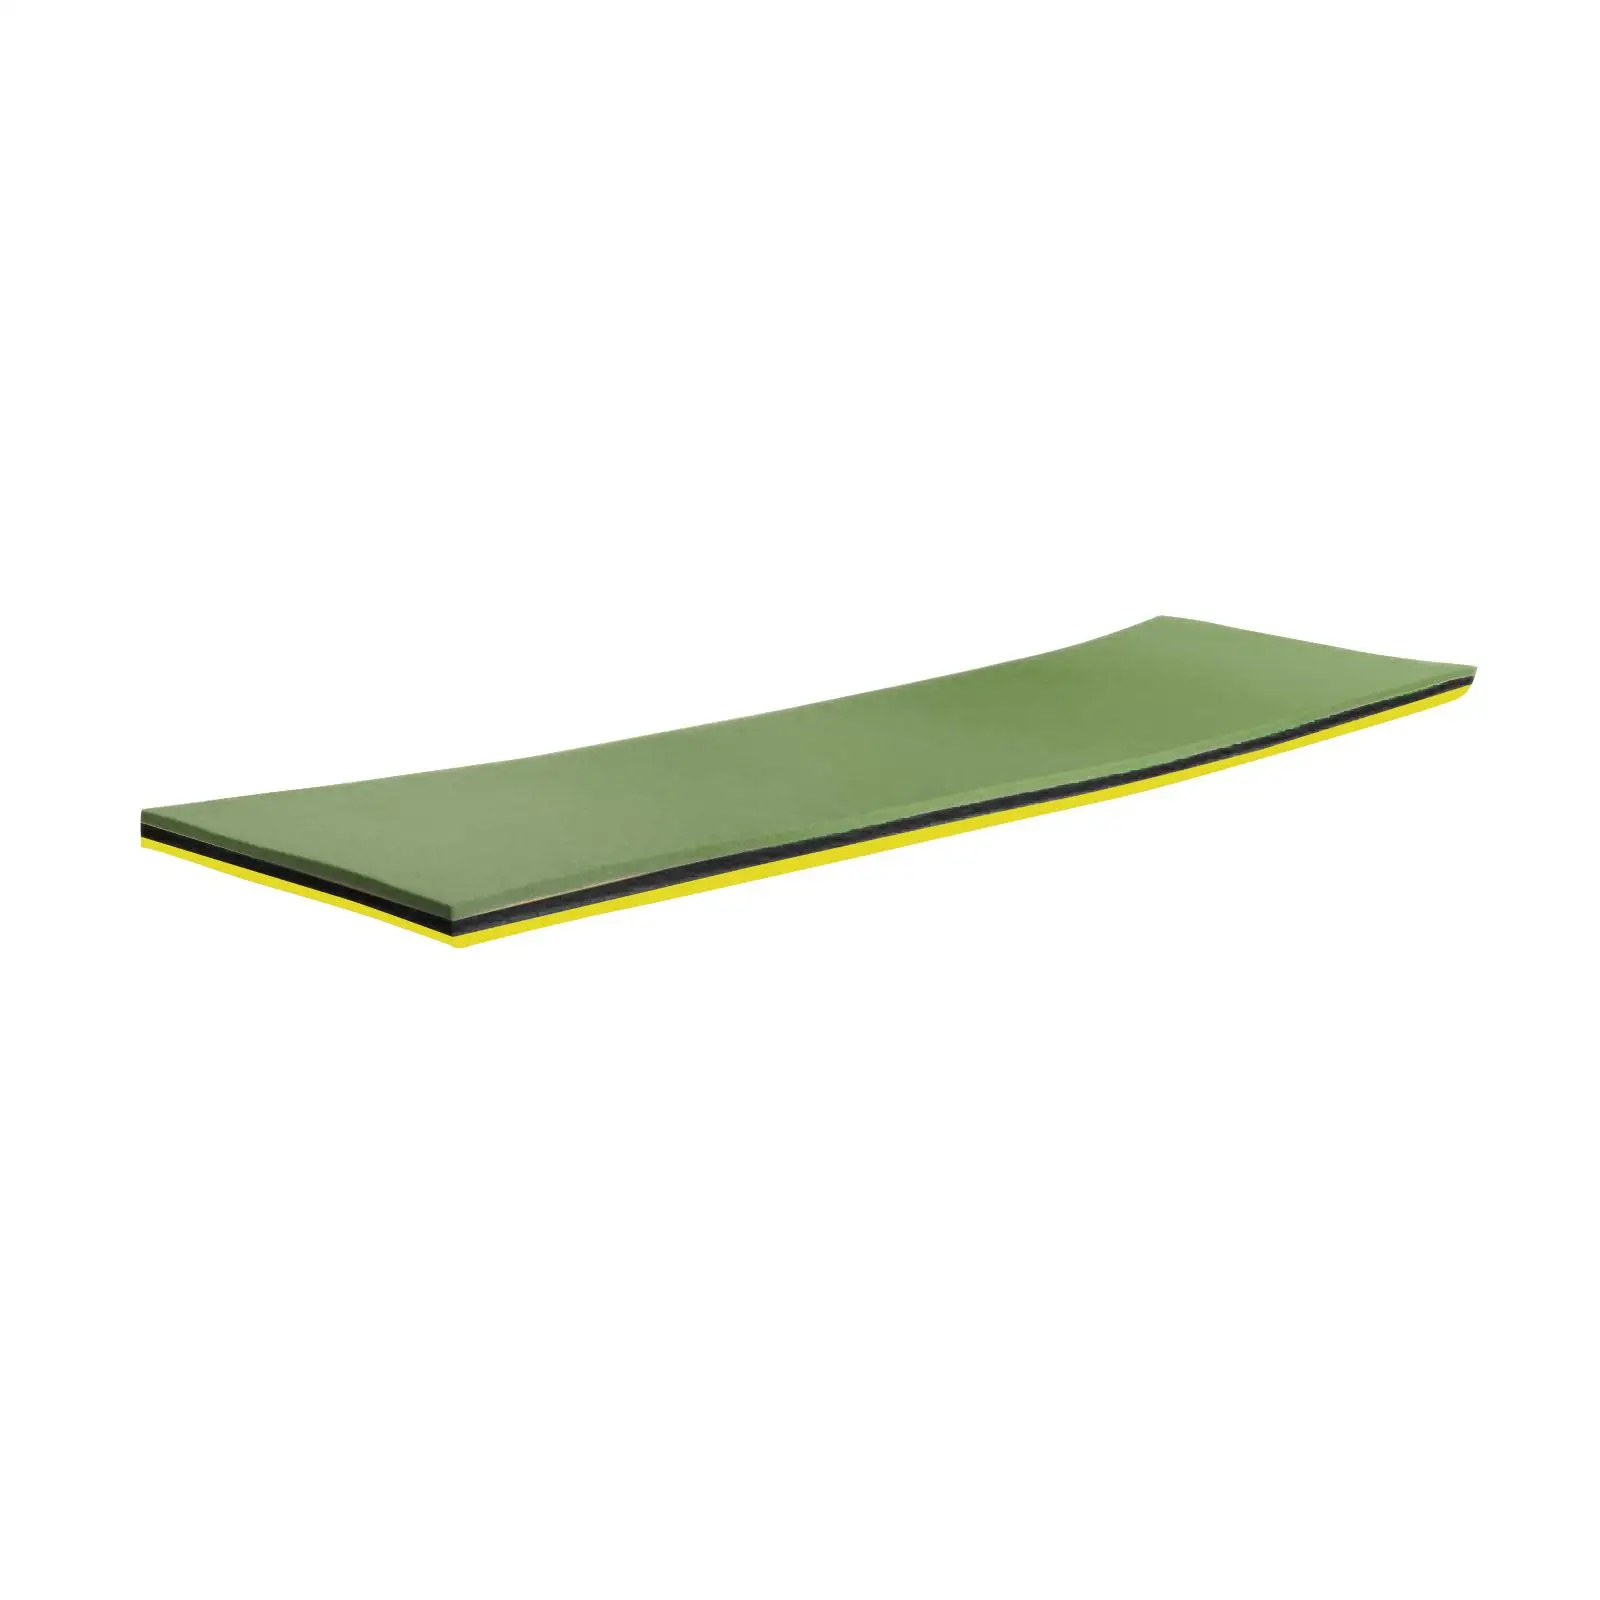 Floating mat water pad Cushion 3 Layer 110x40x3.2cm Portable